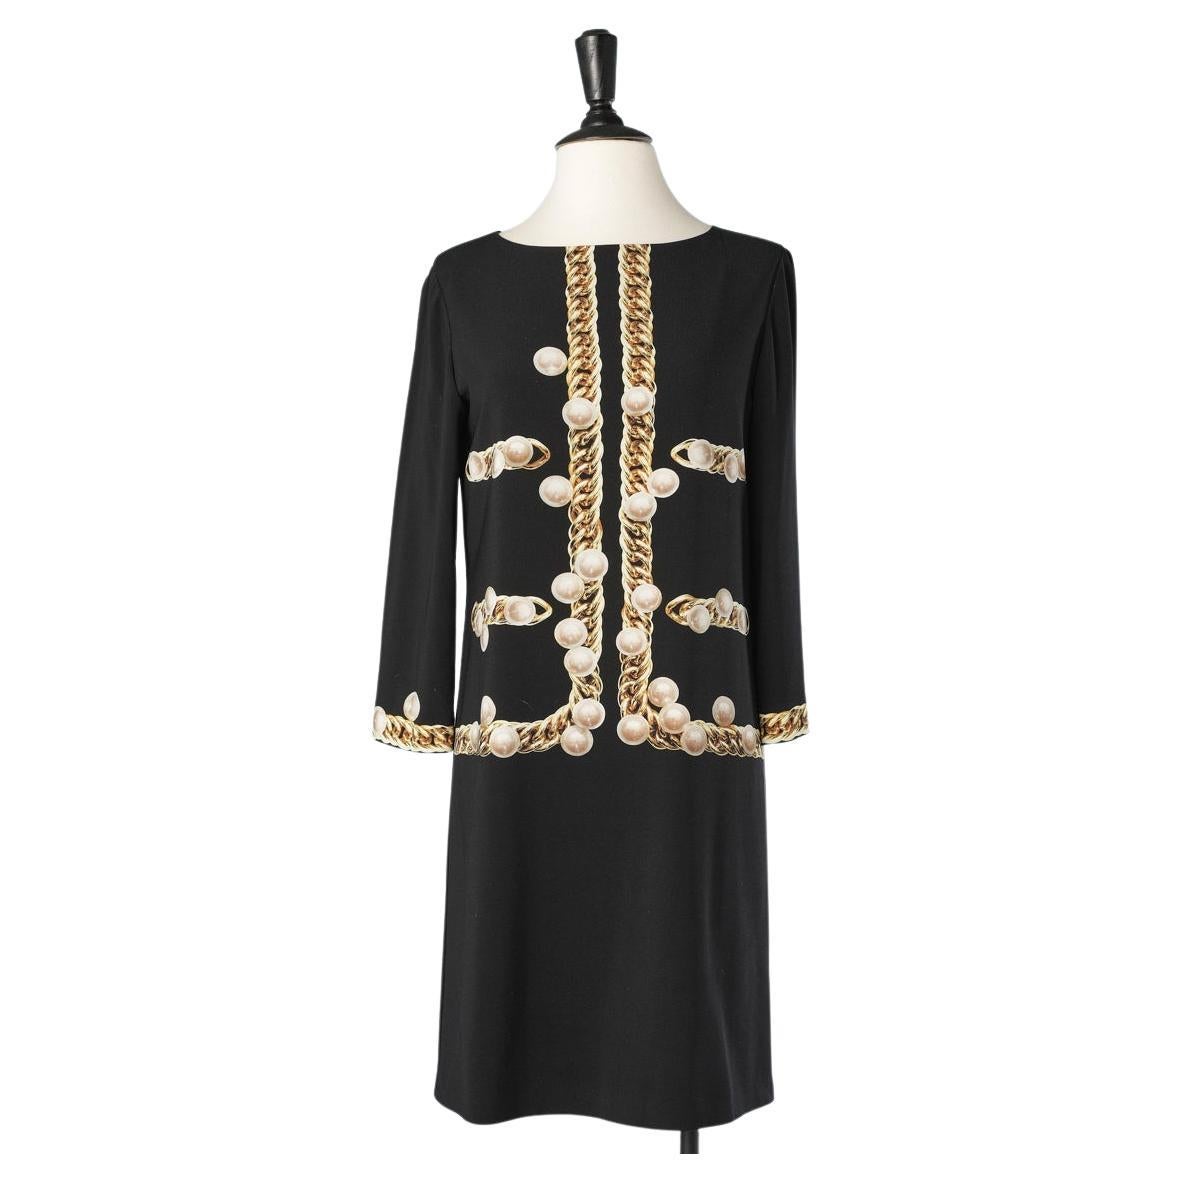 Black cocktail dress with oversize pearls and chain print Moschino Cheap & Chic  For Sale